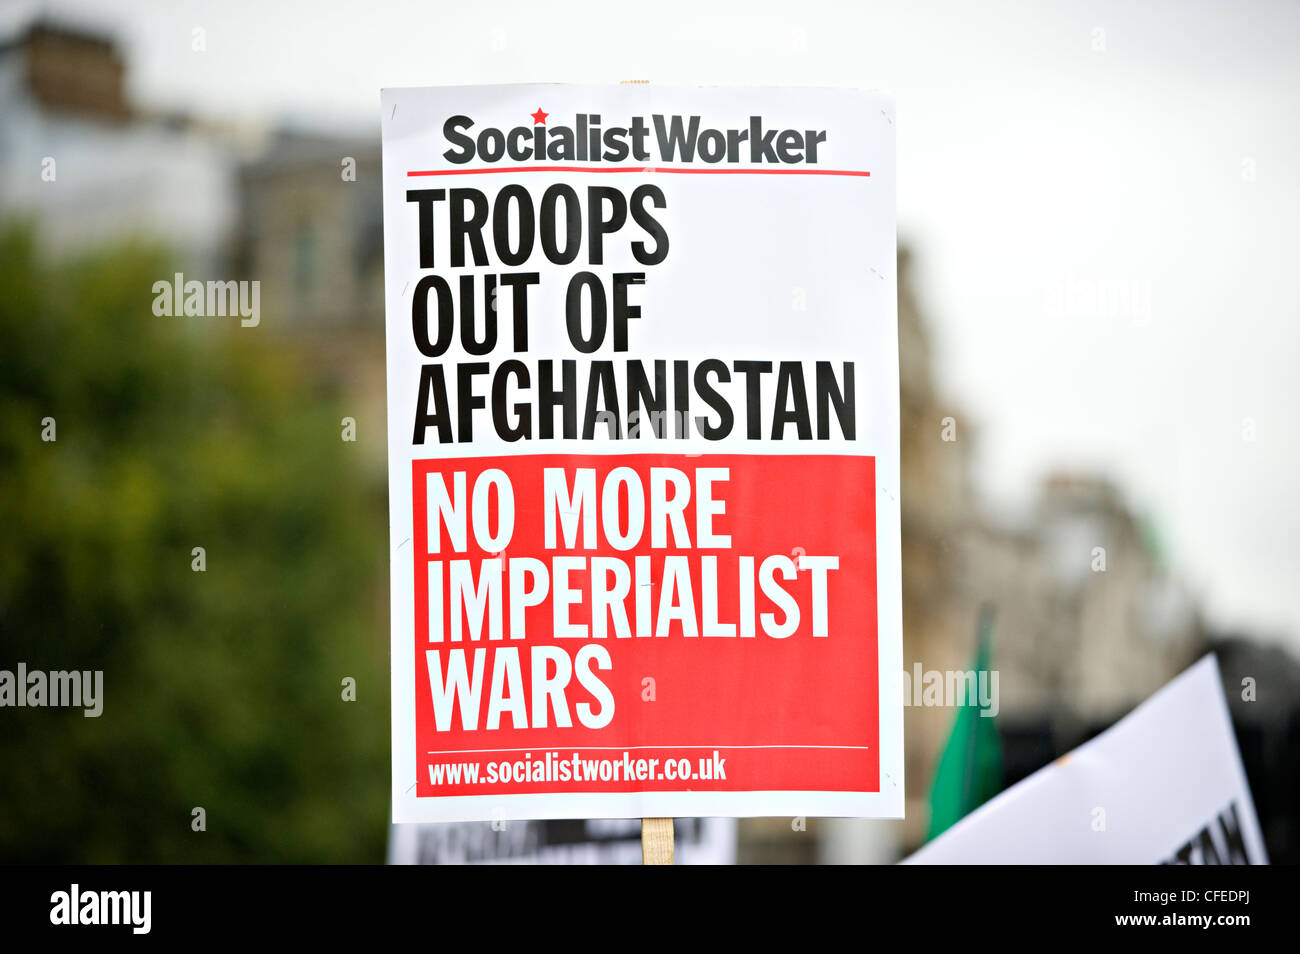 Socialist Worker protest banners at a London anti-war demonstration Stock Photo